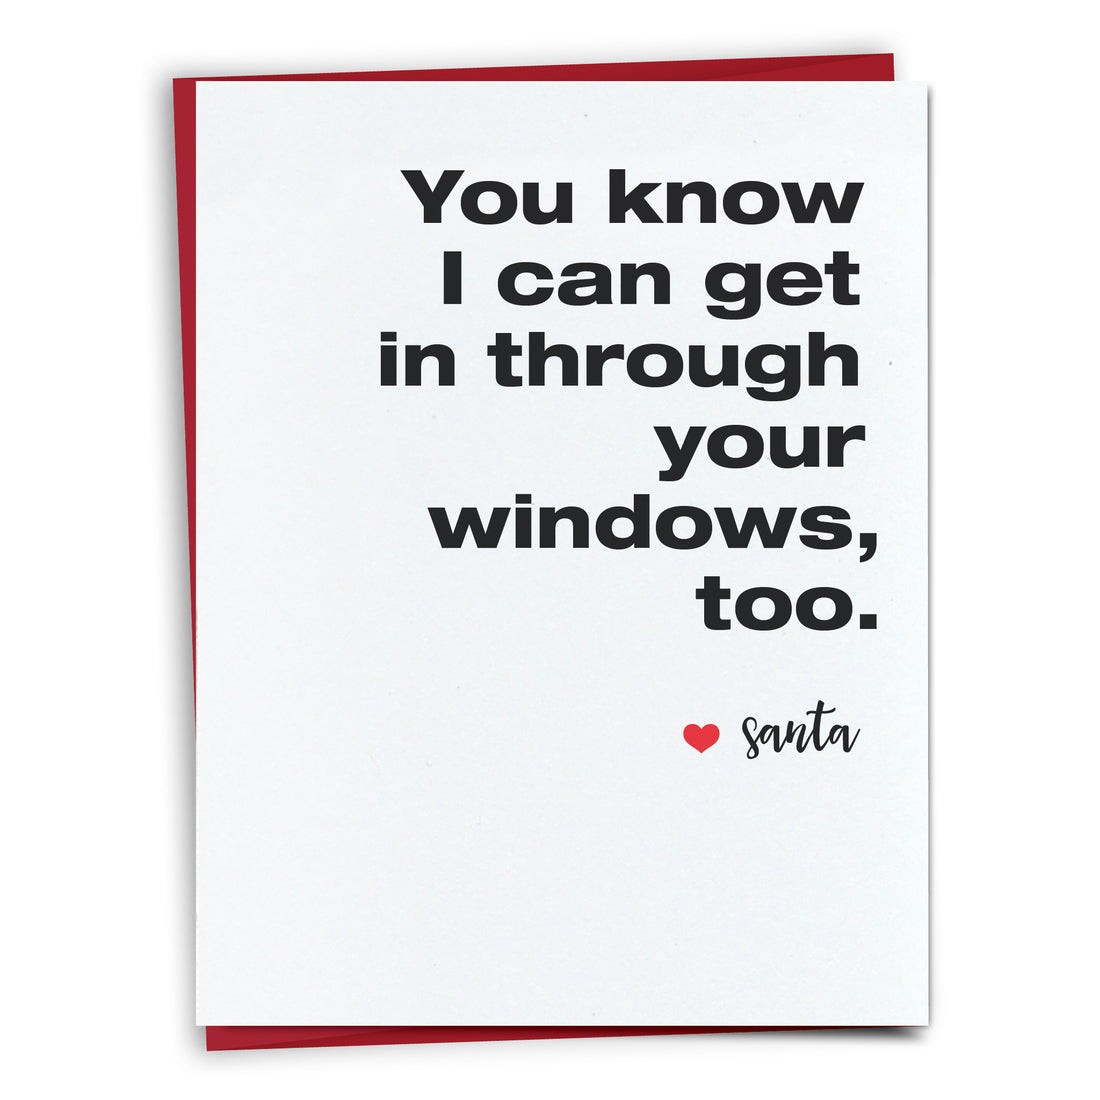 I can get in through your windows, too card